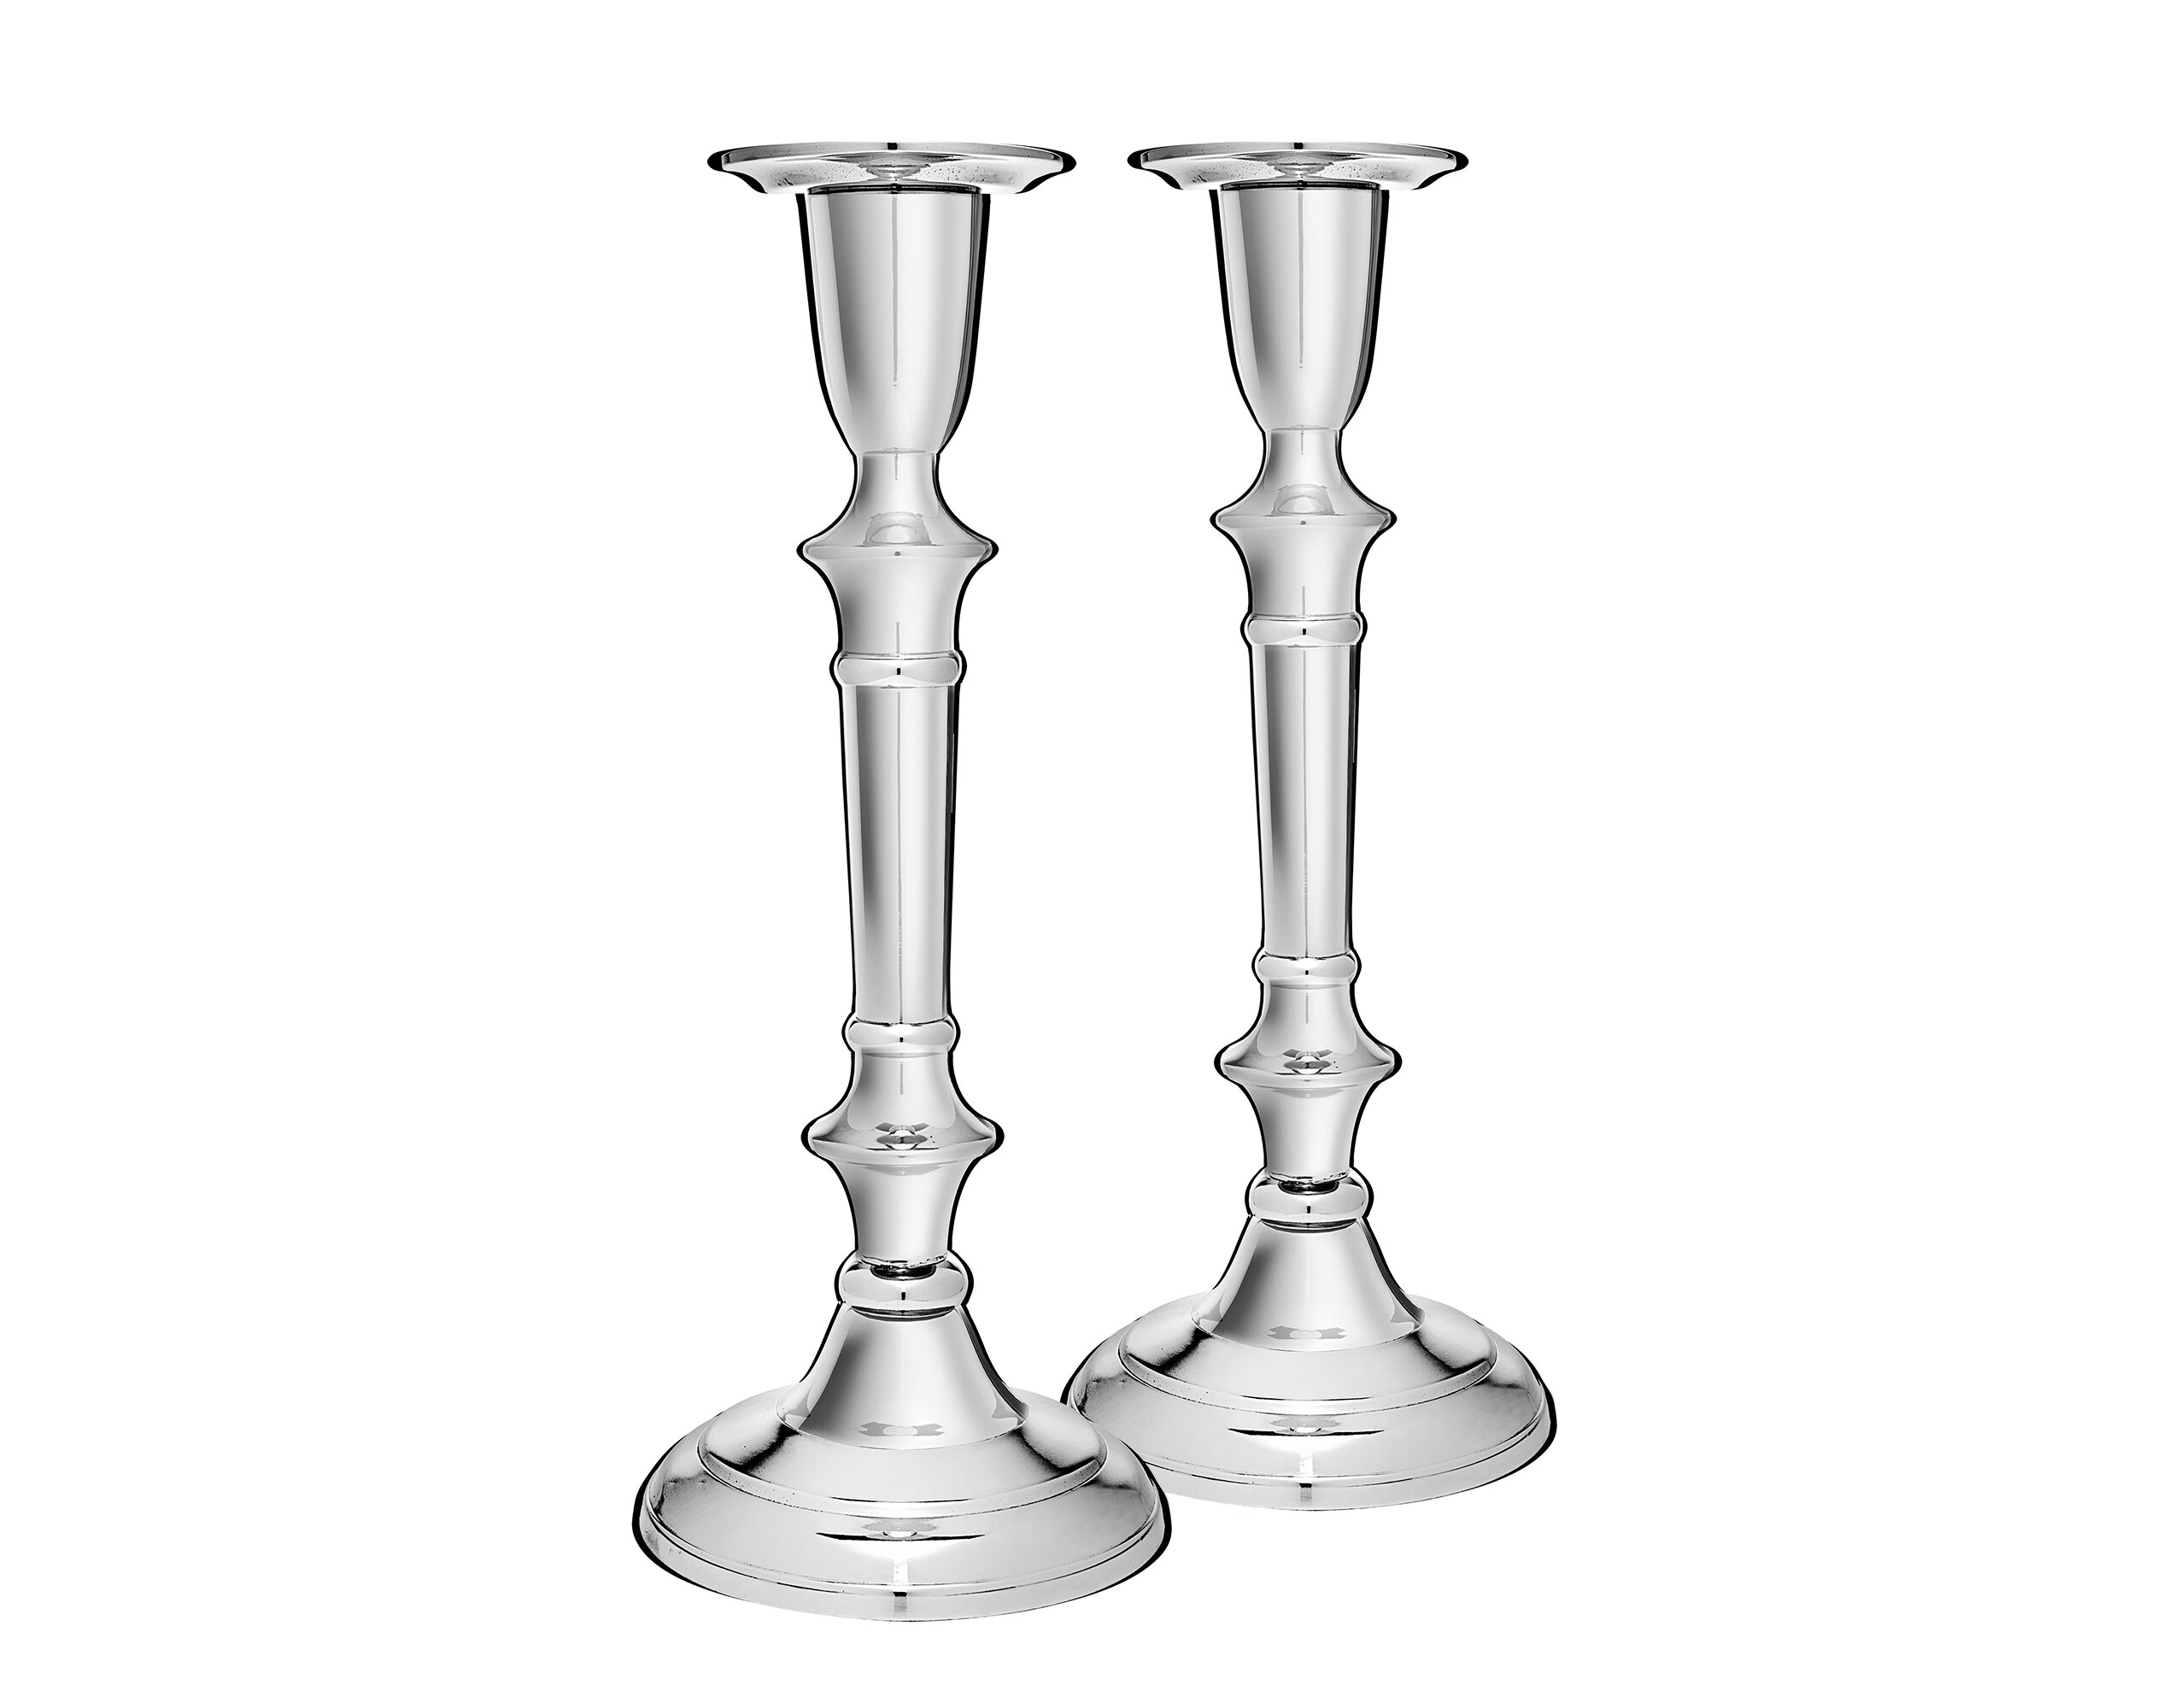 Revere 2 Piece Stainless Steel Tabletop Candle Stick Set